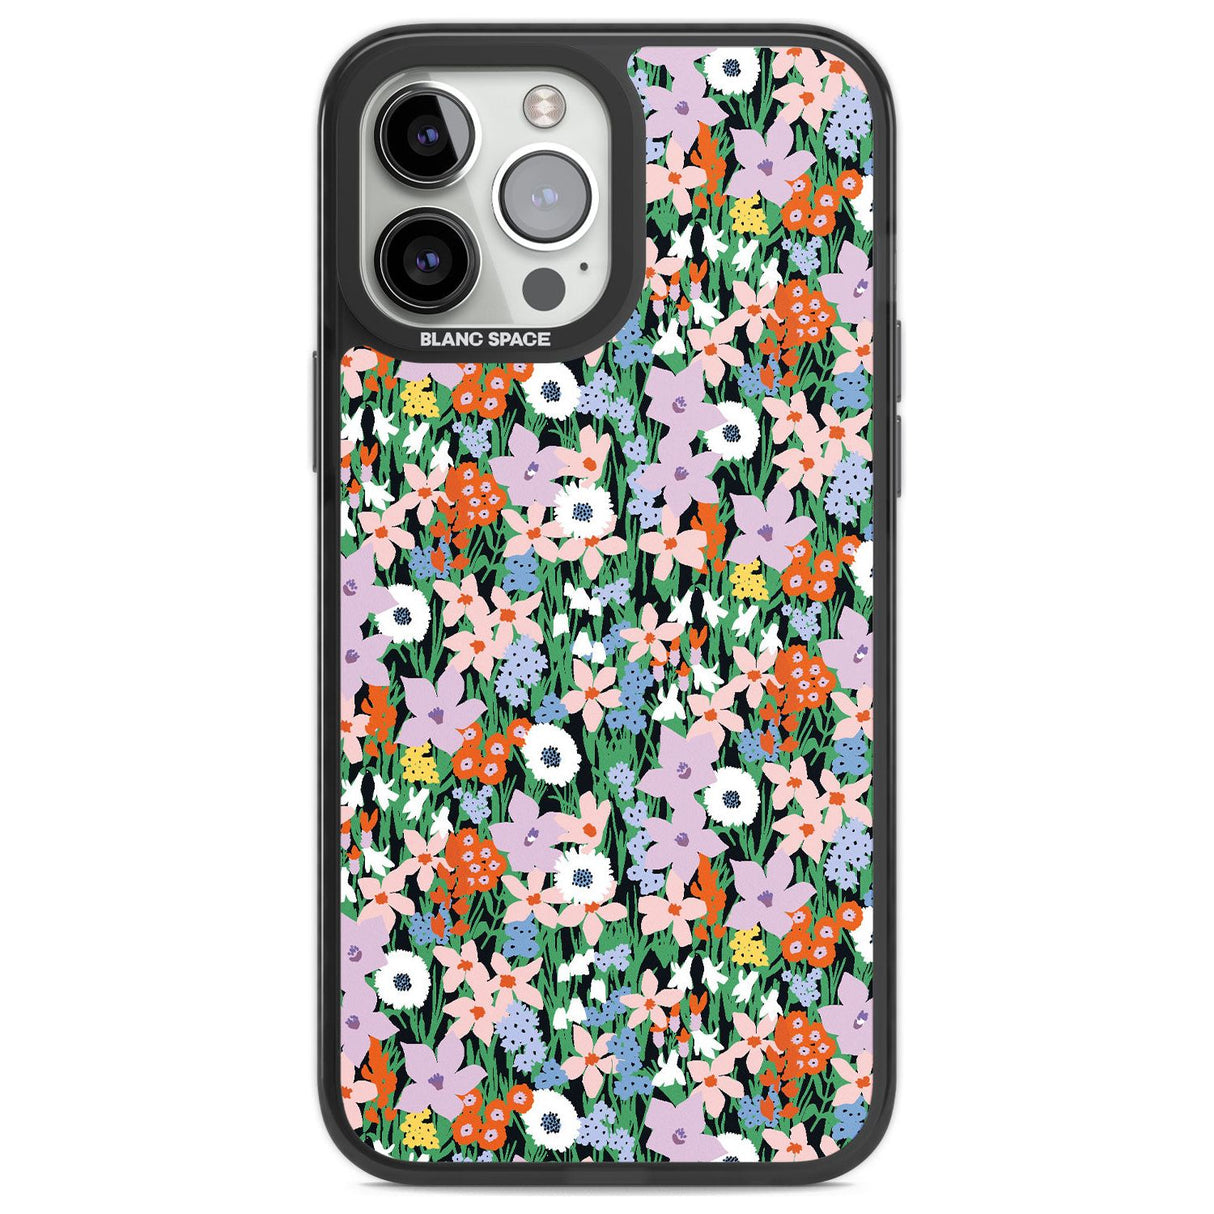 Jazzy Floral Mix: Solid Phone Case iPhone 13 Pro Max / Black Impact Case,iPhone 14 Pro Max / Black Impact Case Blanc Space